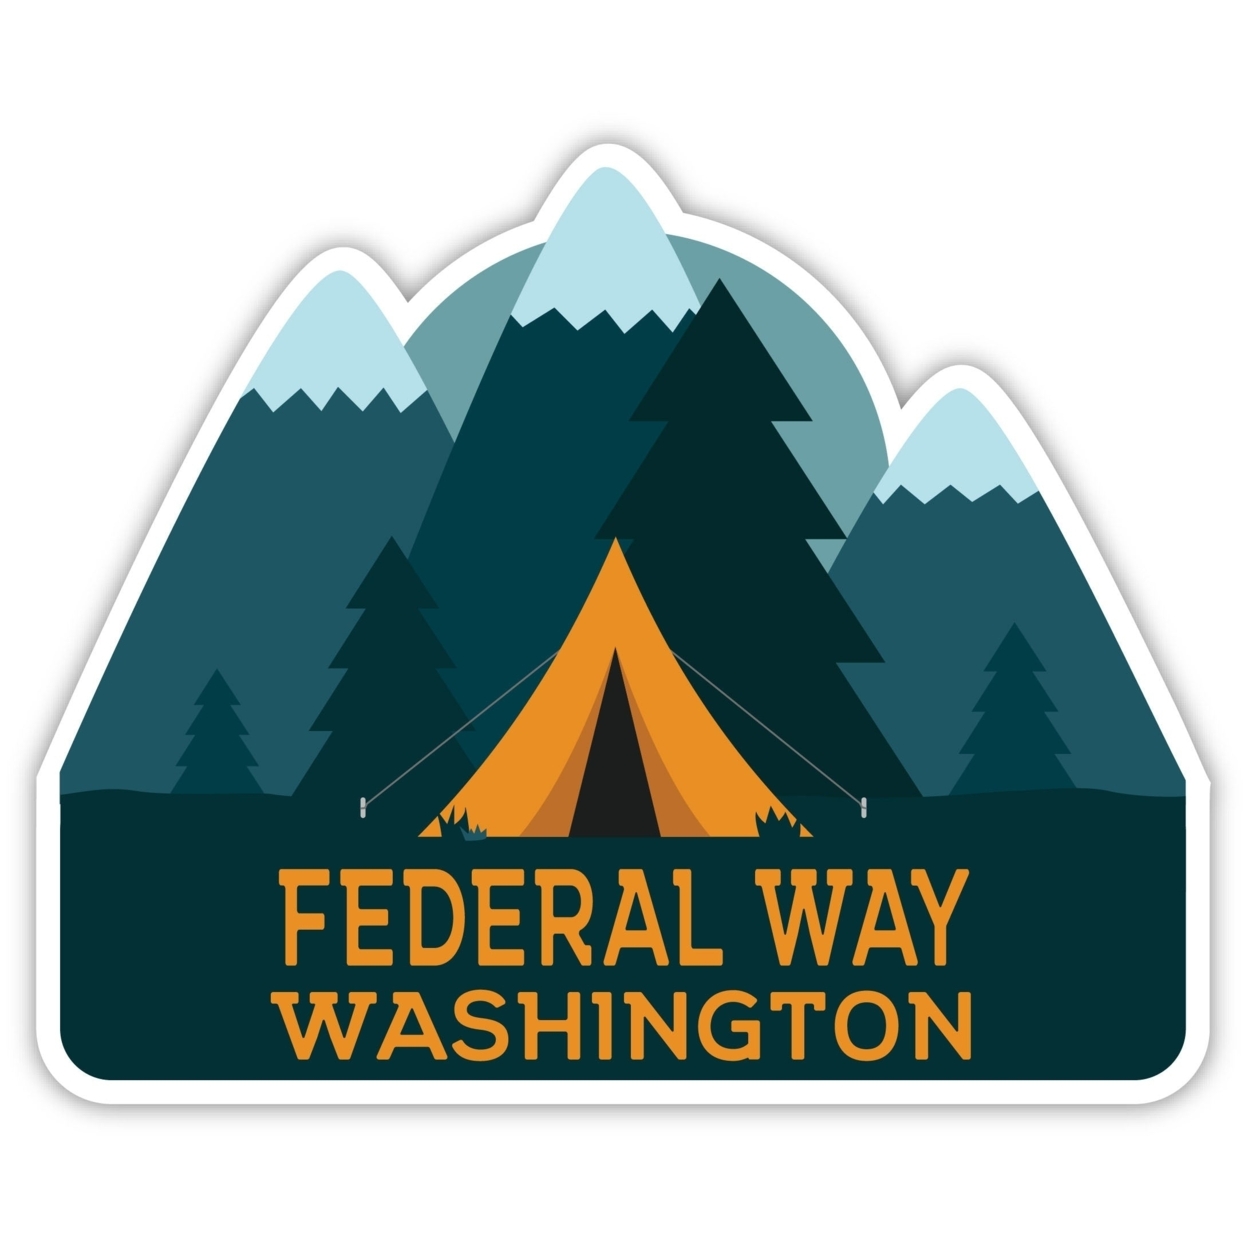 Federal Way Washington Souvenir Decorative Stickers (Choose Theme And Size) - 4-Pack, 4-Inch, Tent